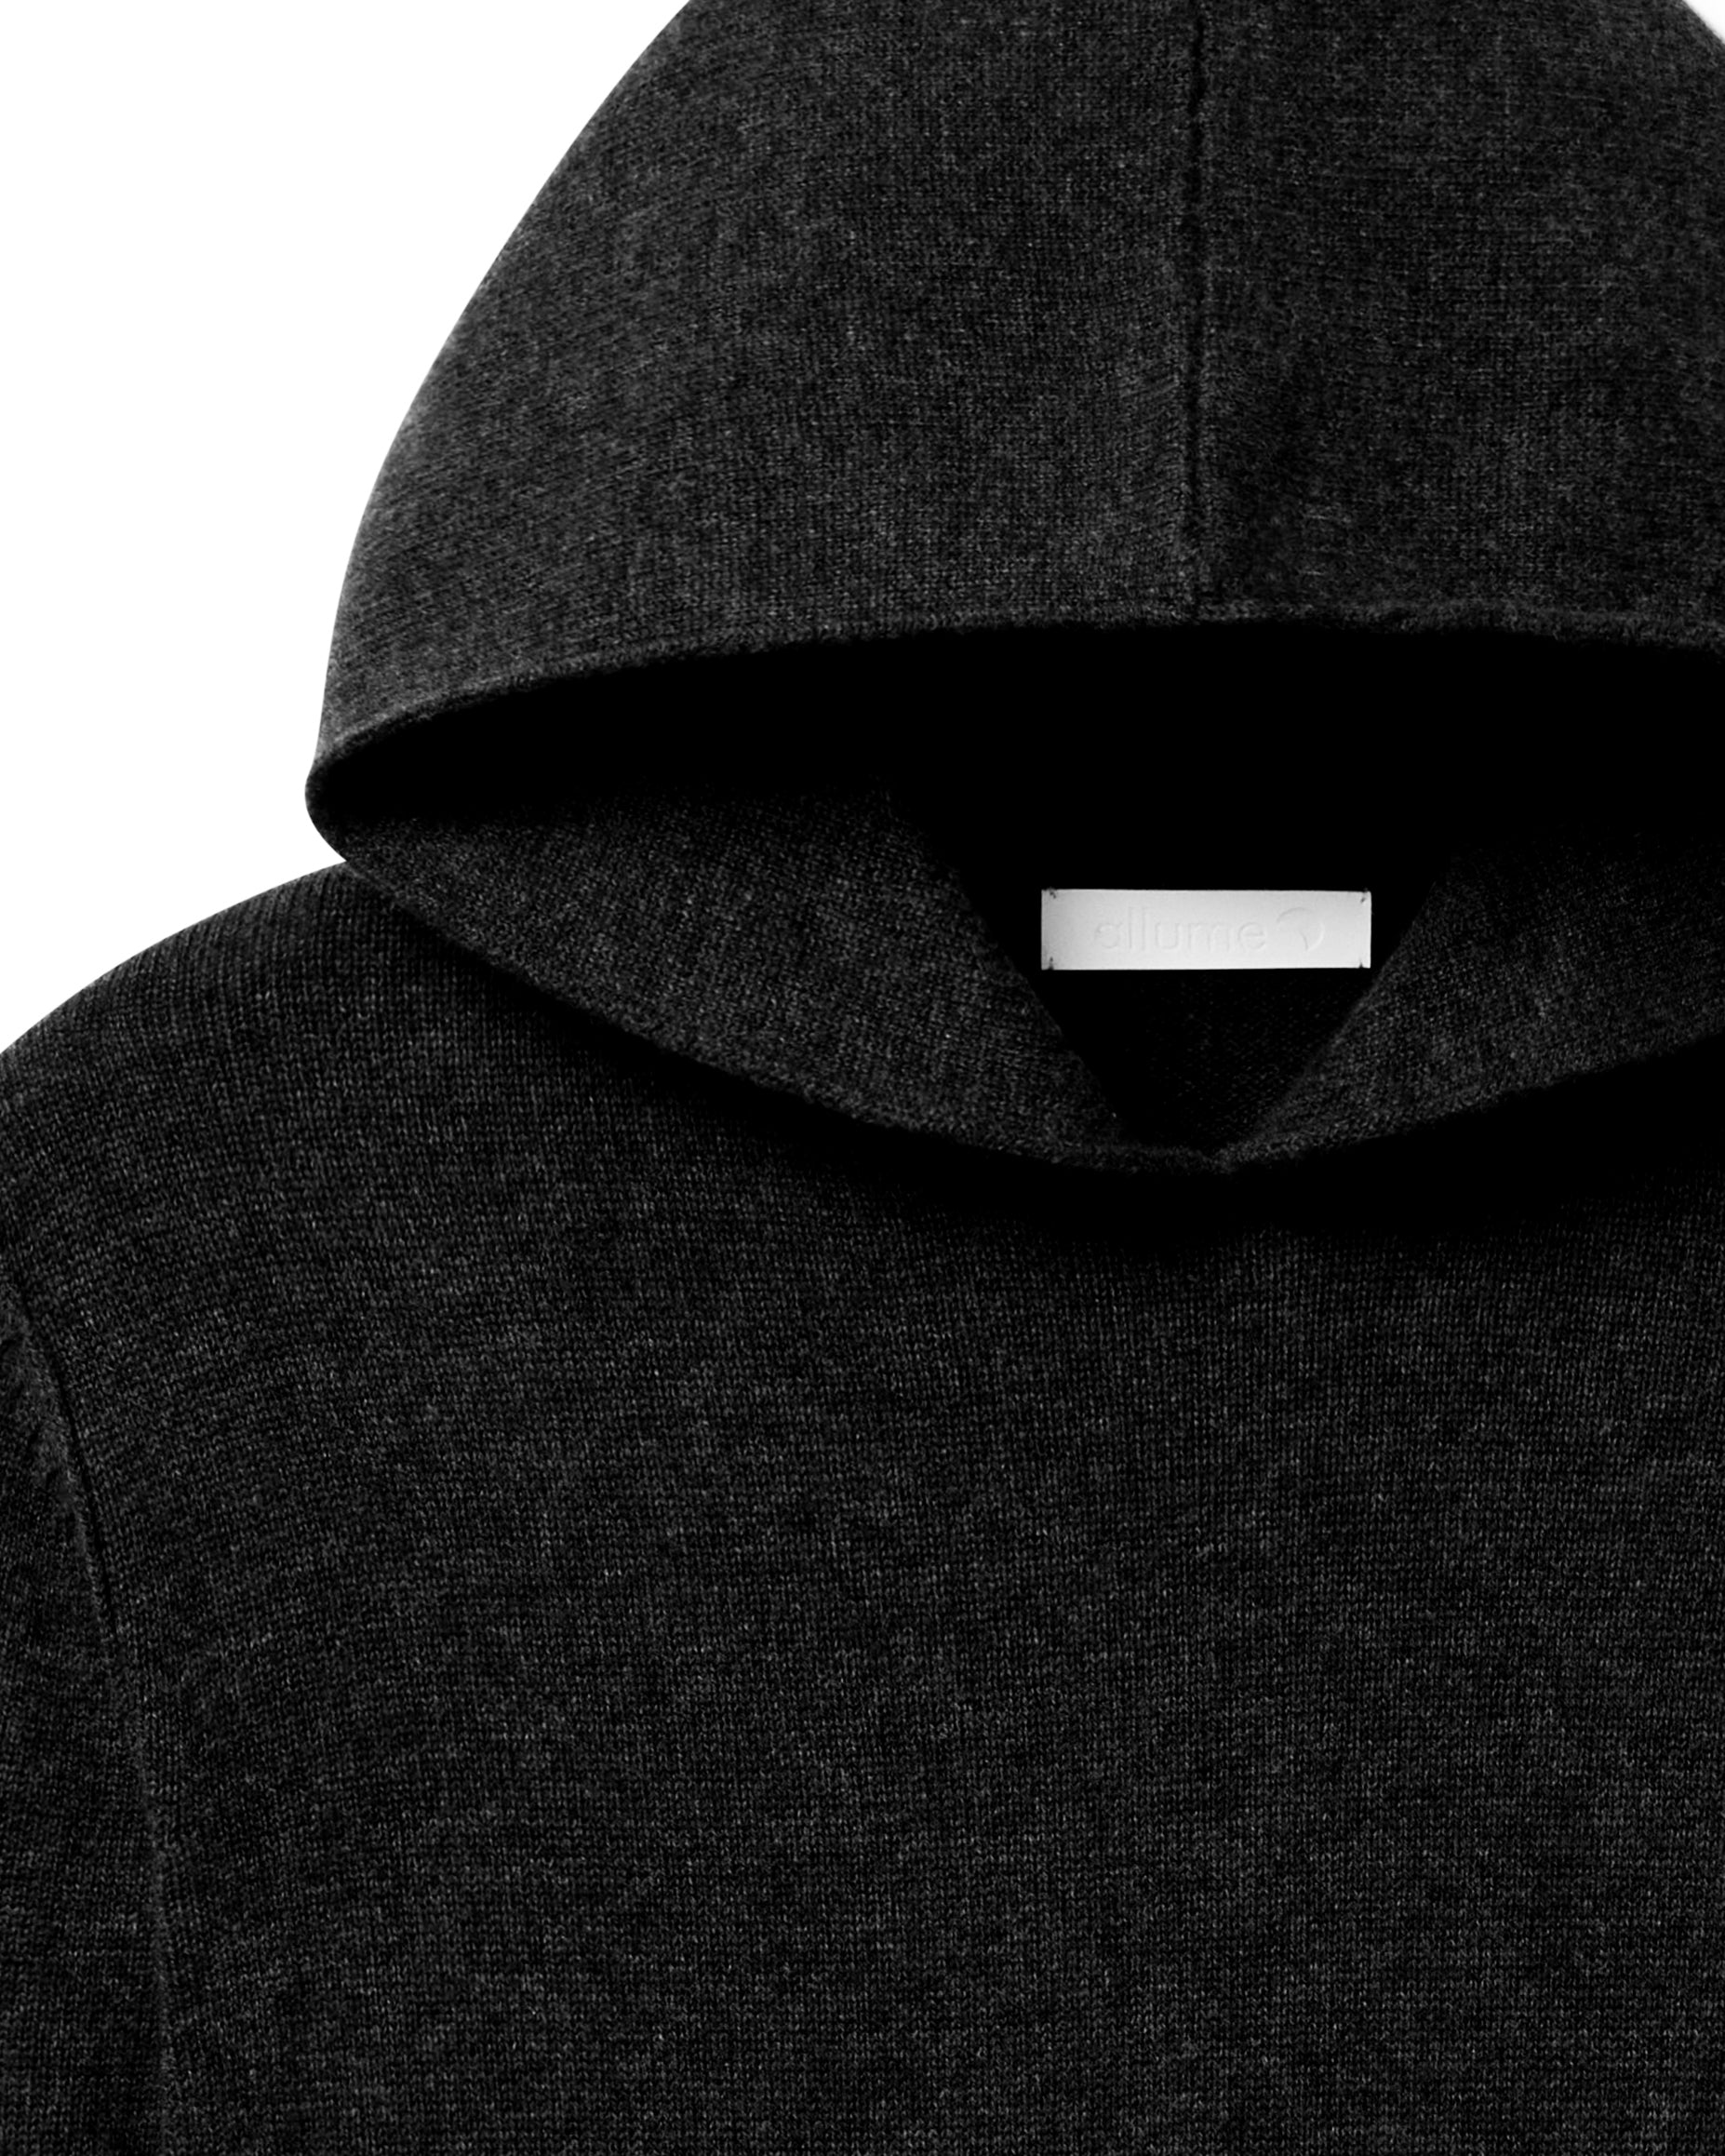 allume Recycled Cashmere Black CS—02 Hoodie Black Knitwear